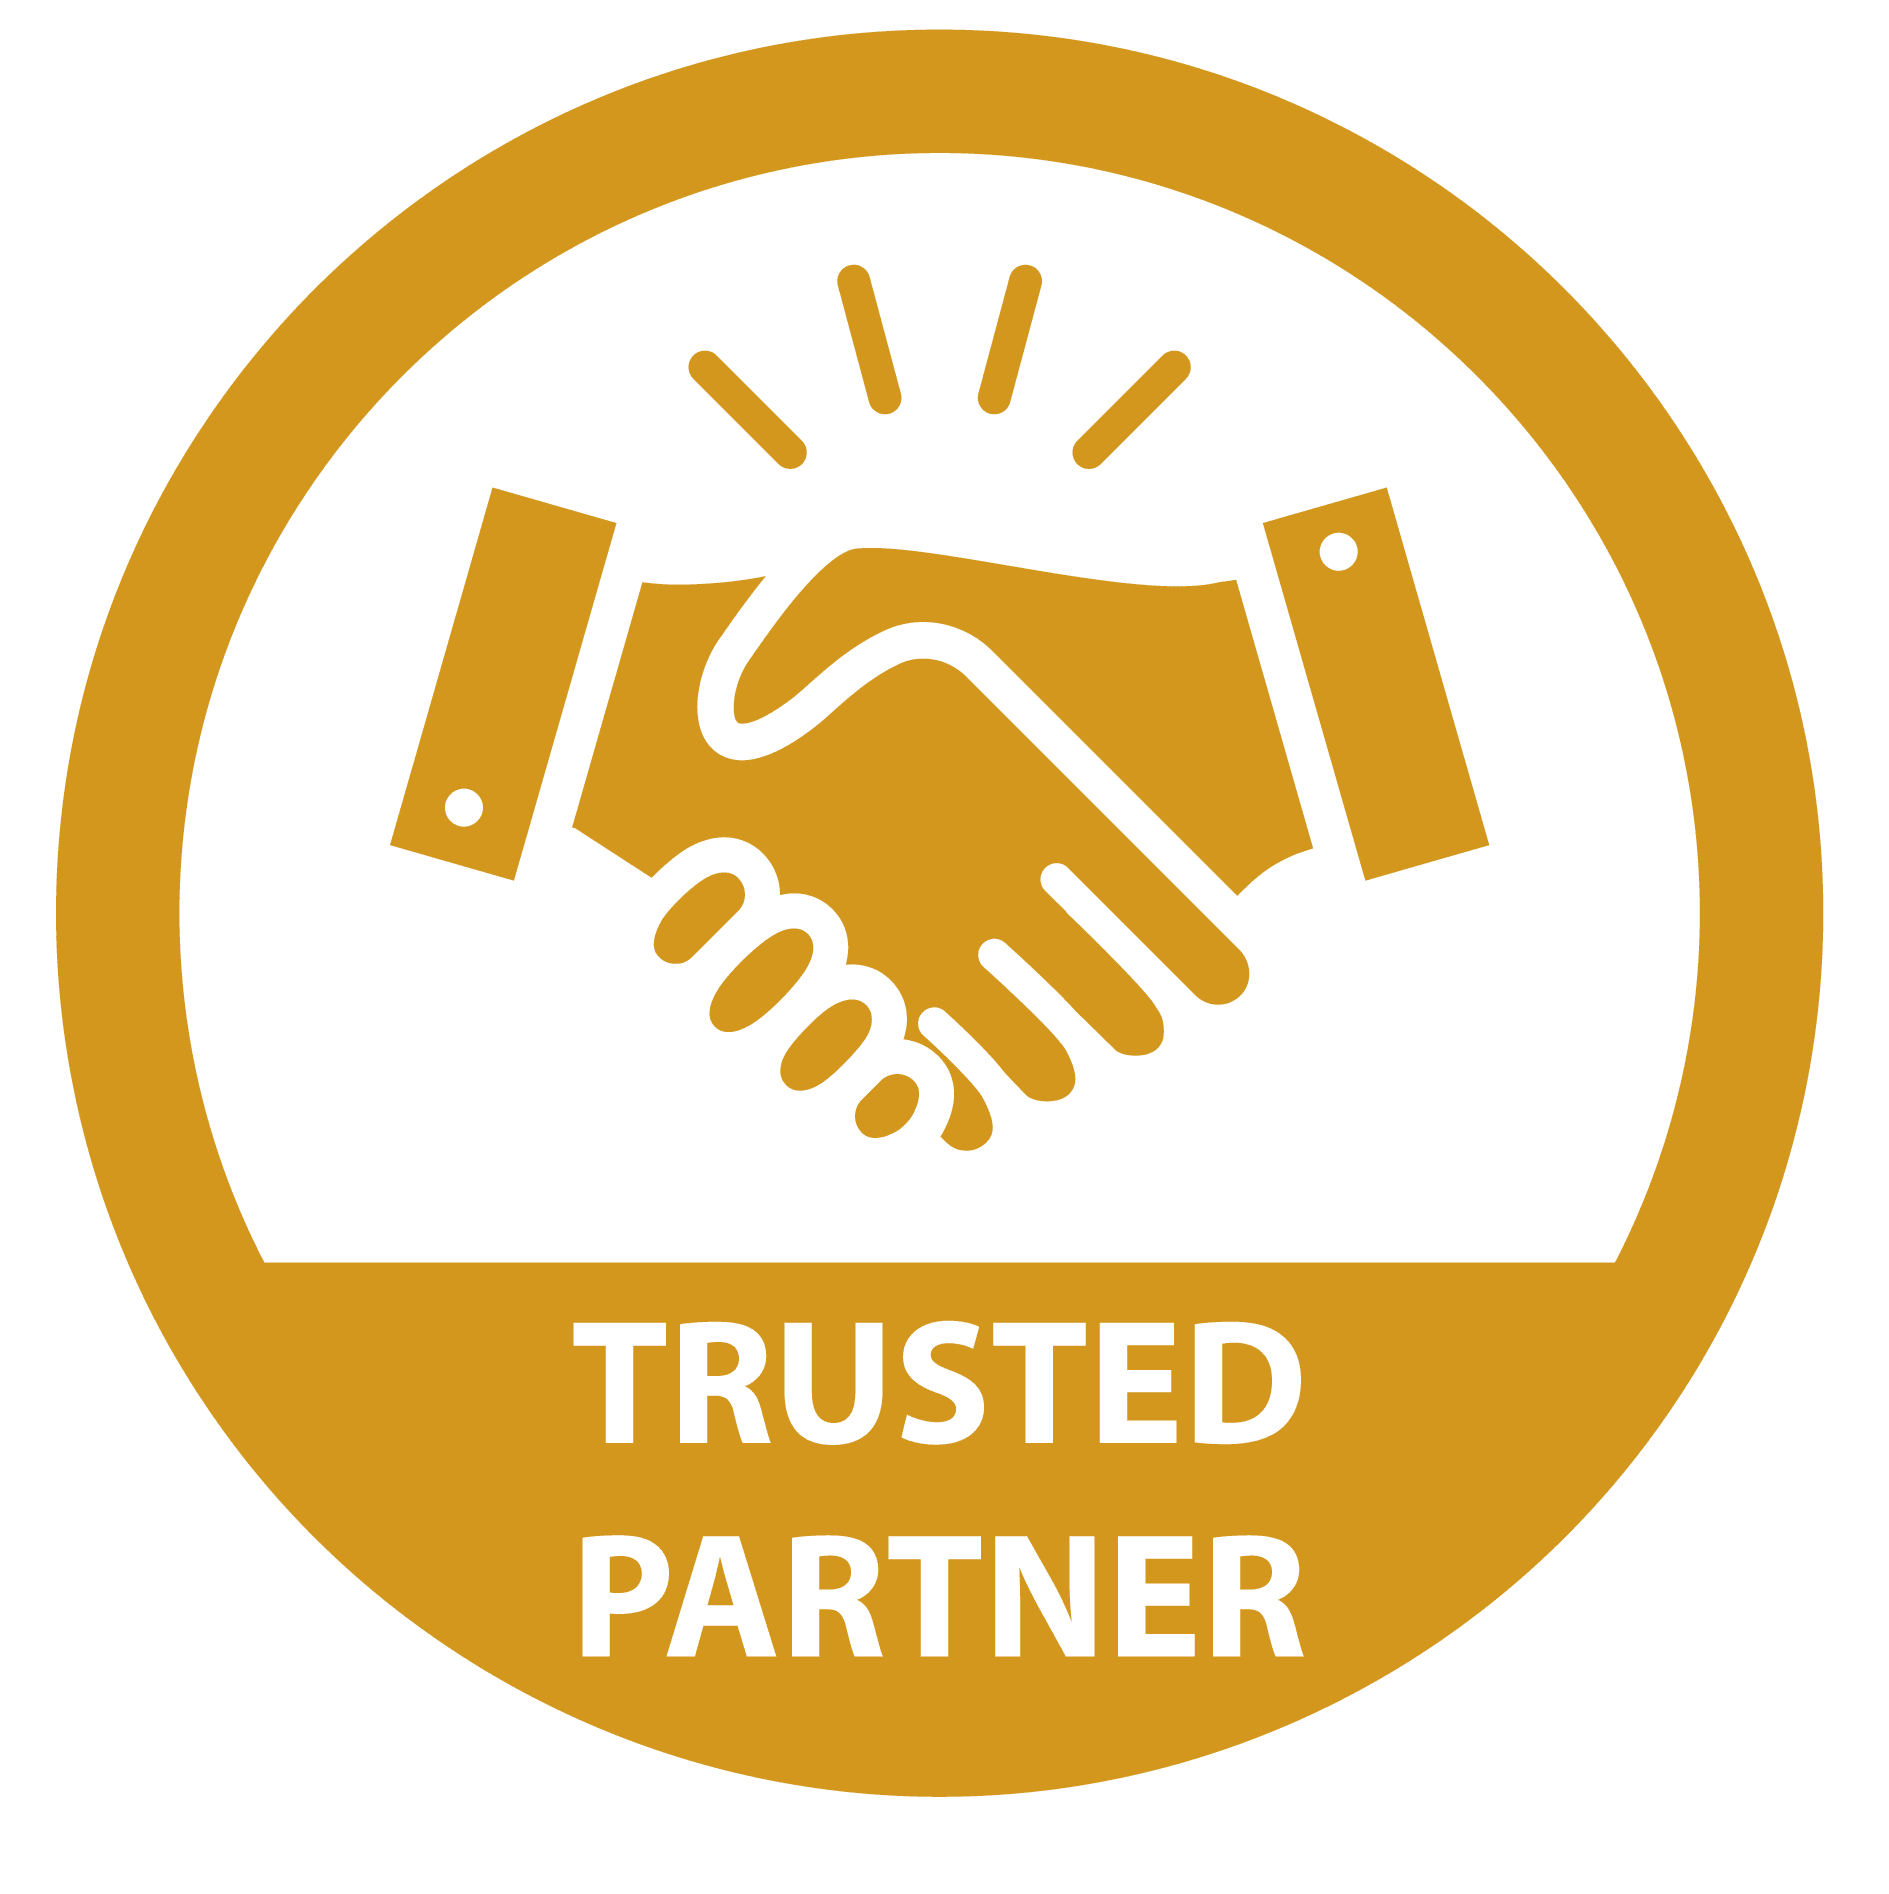 Trusted partner